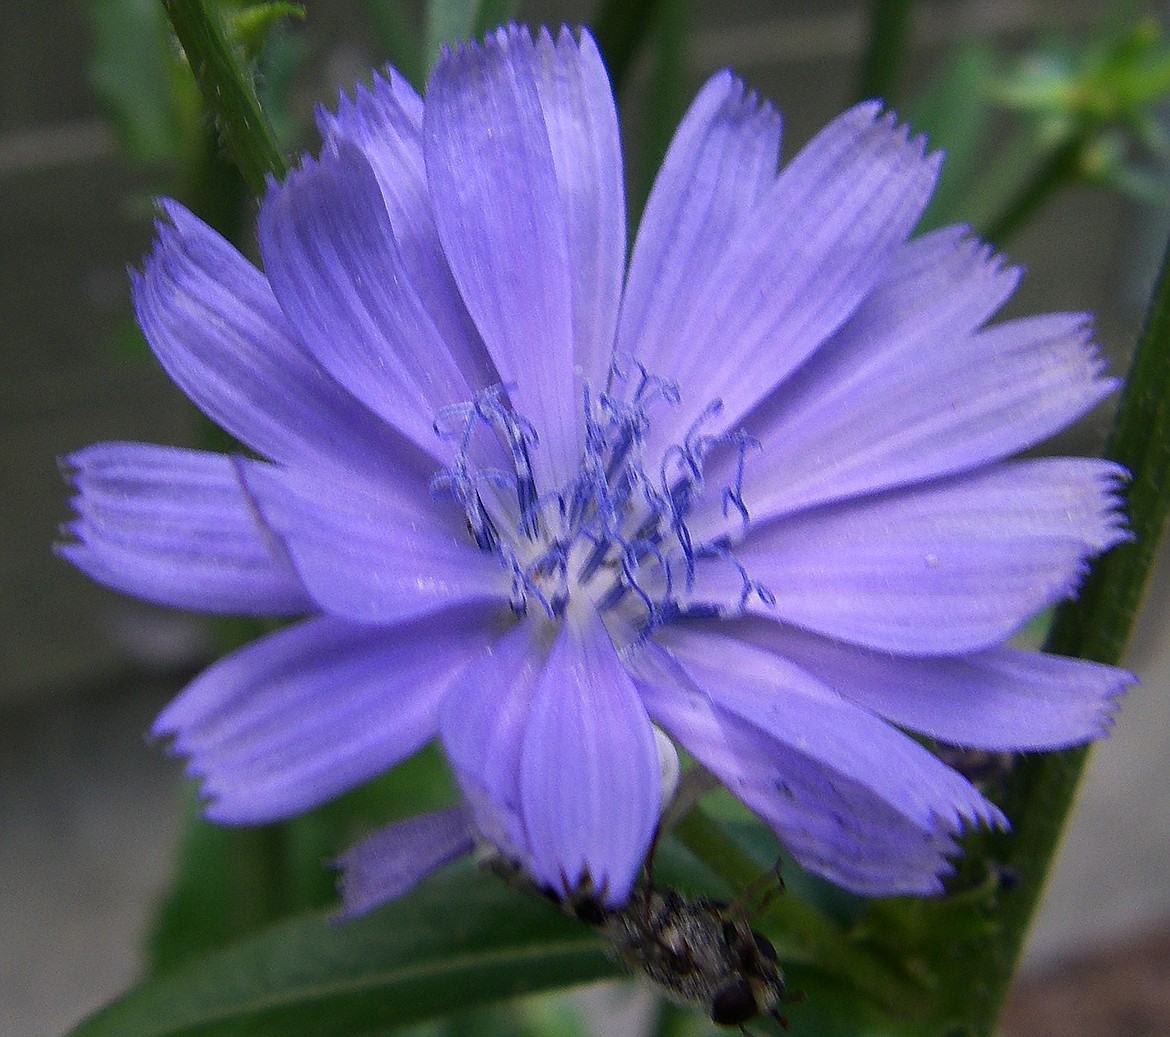 Chicory blossoms warn gardeners to check for squash vice borers.